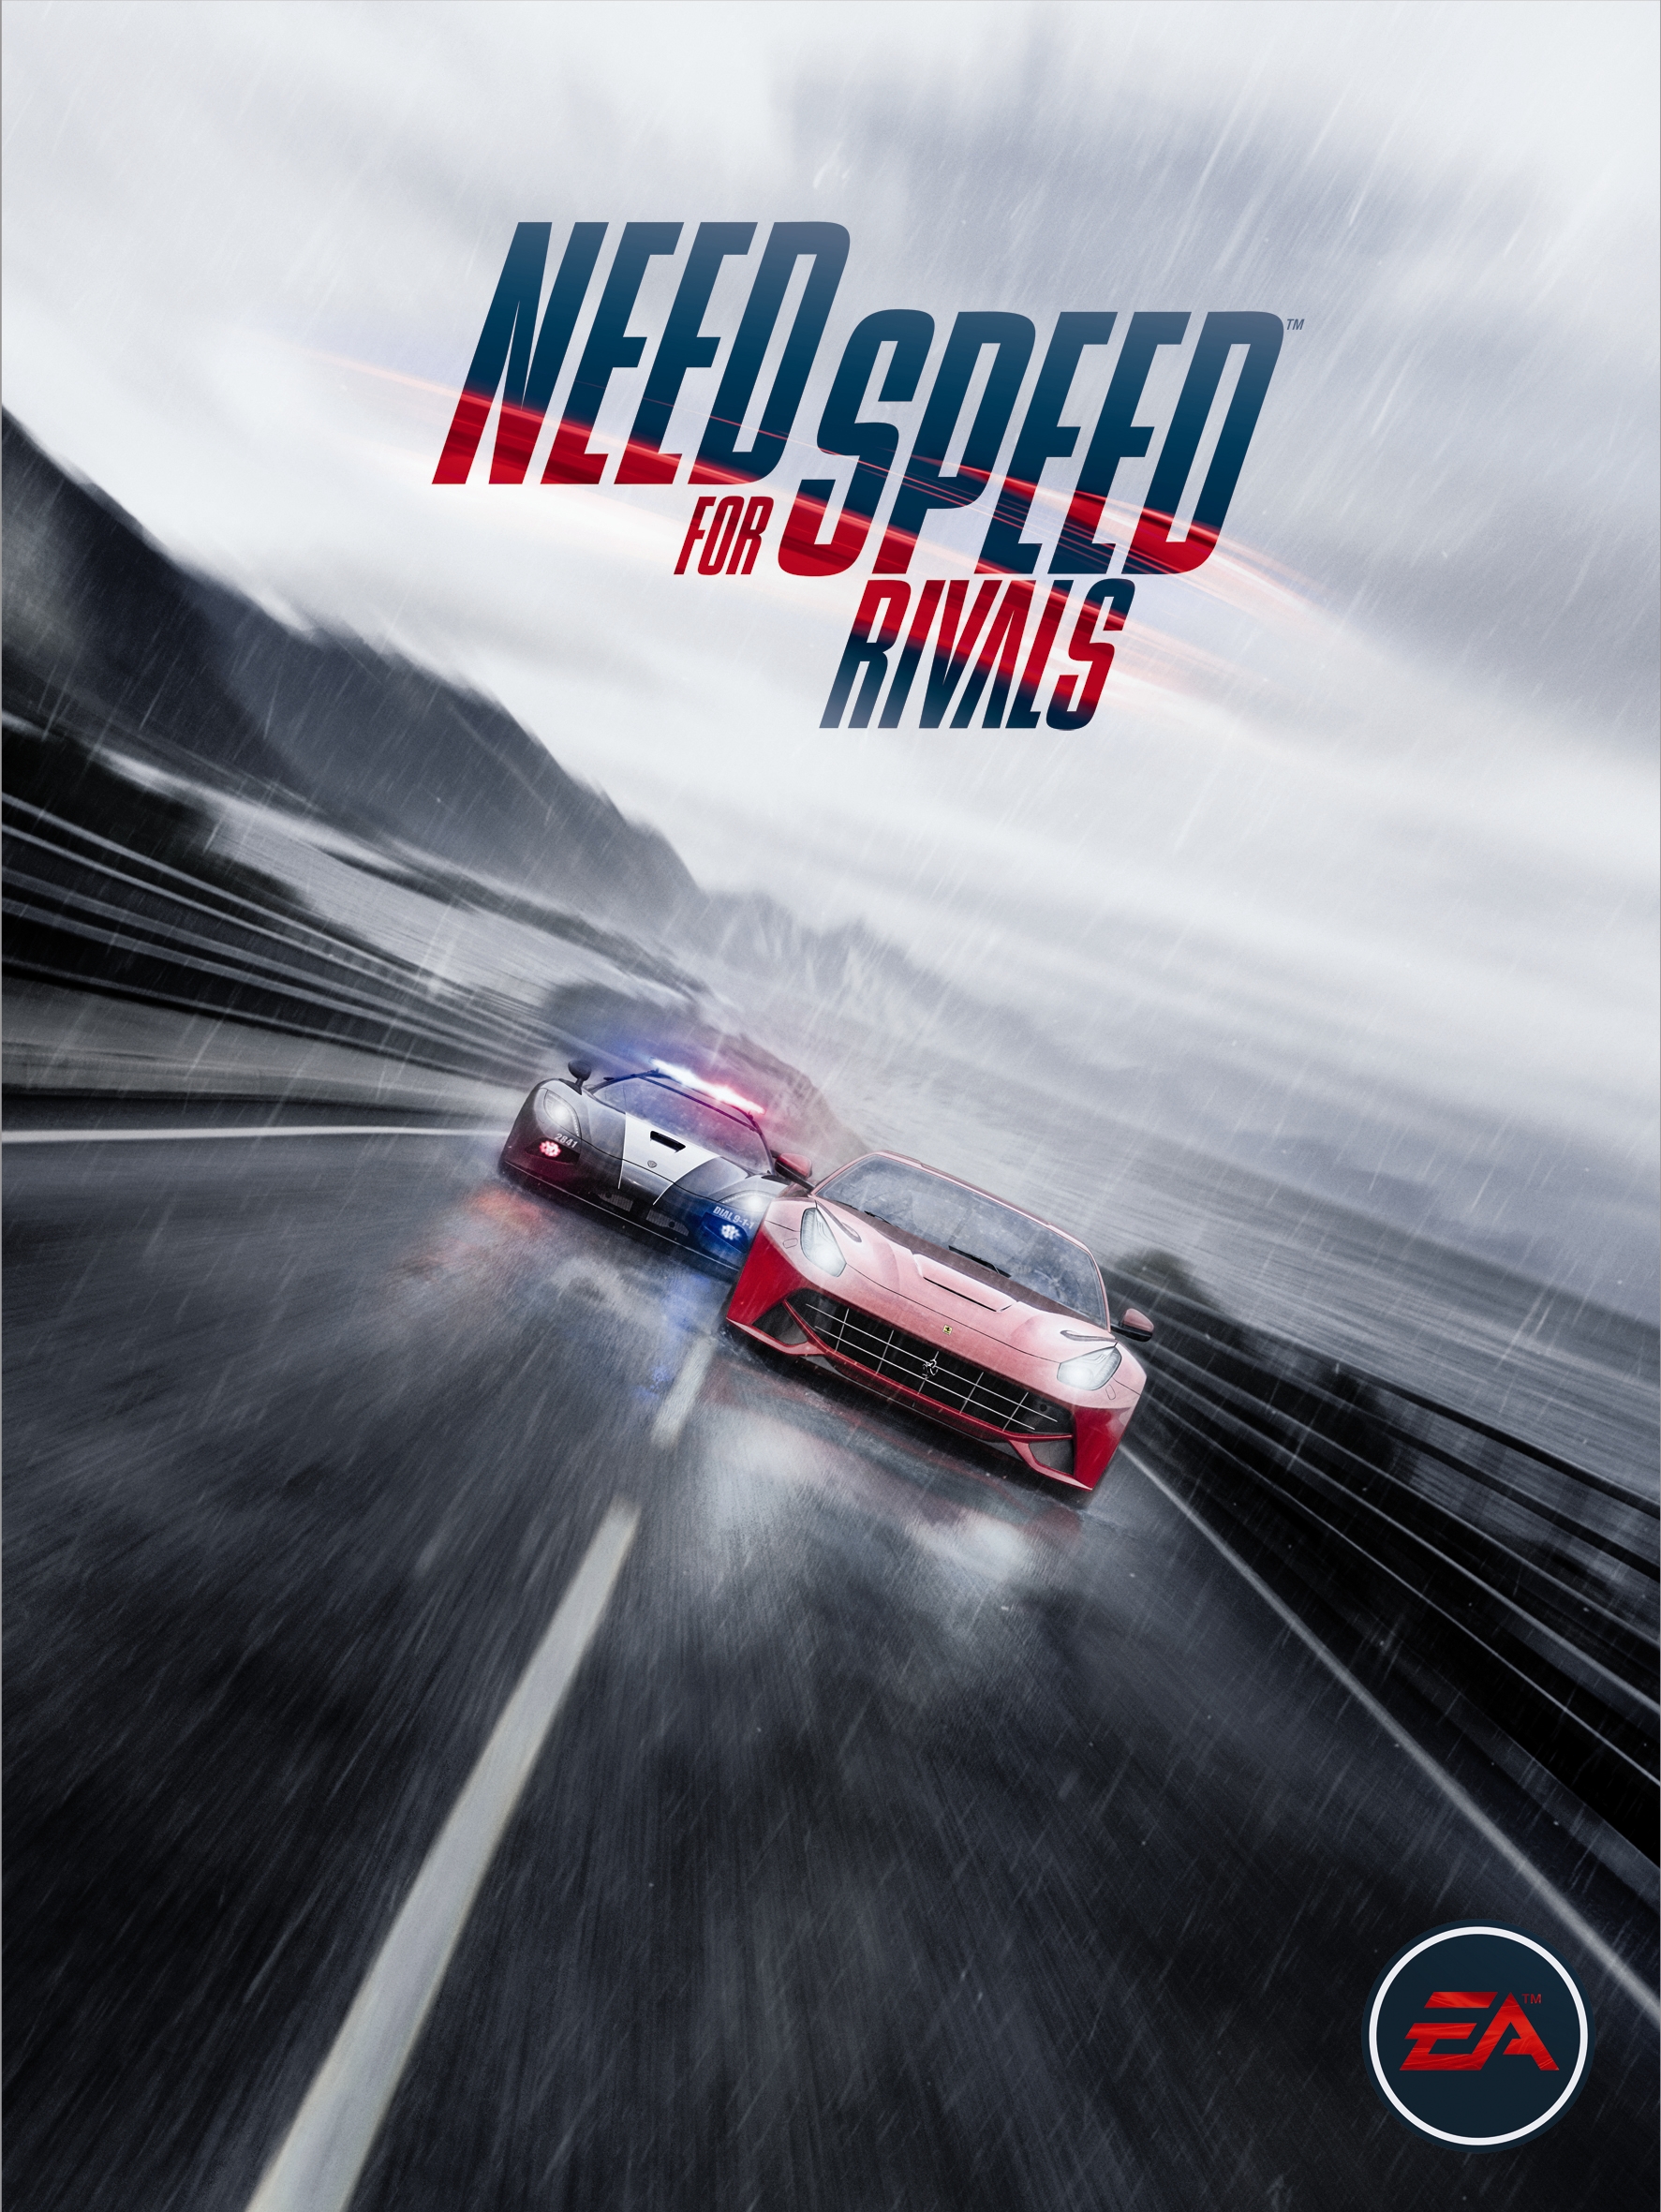 The Need for Speed (Video Game) - TV Tropes